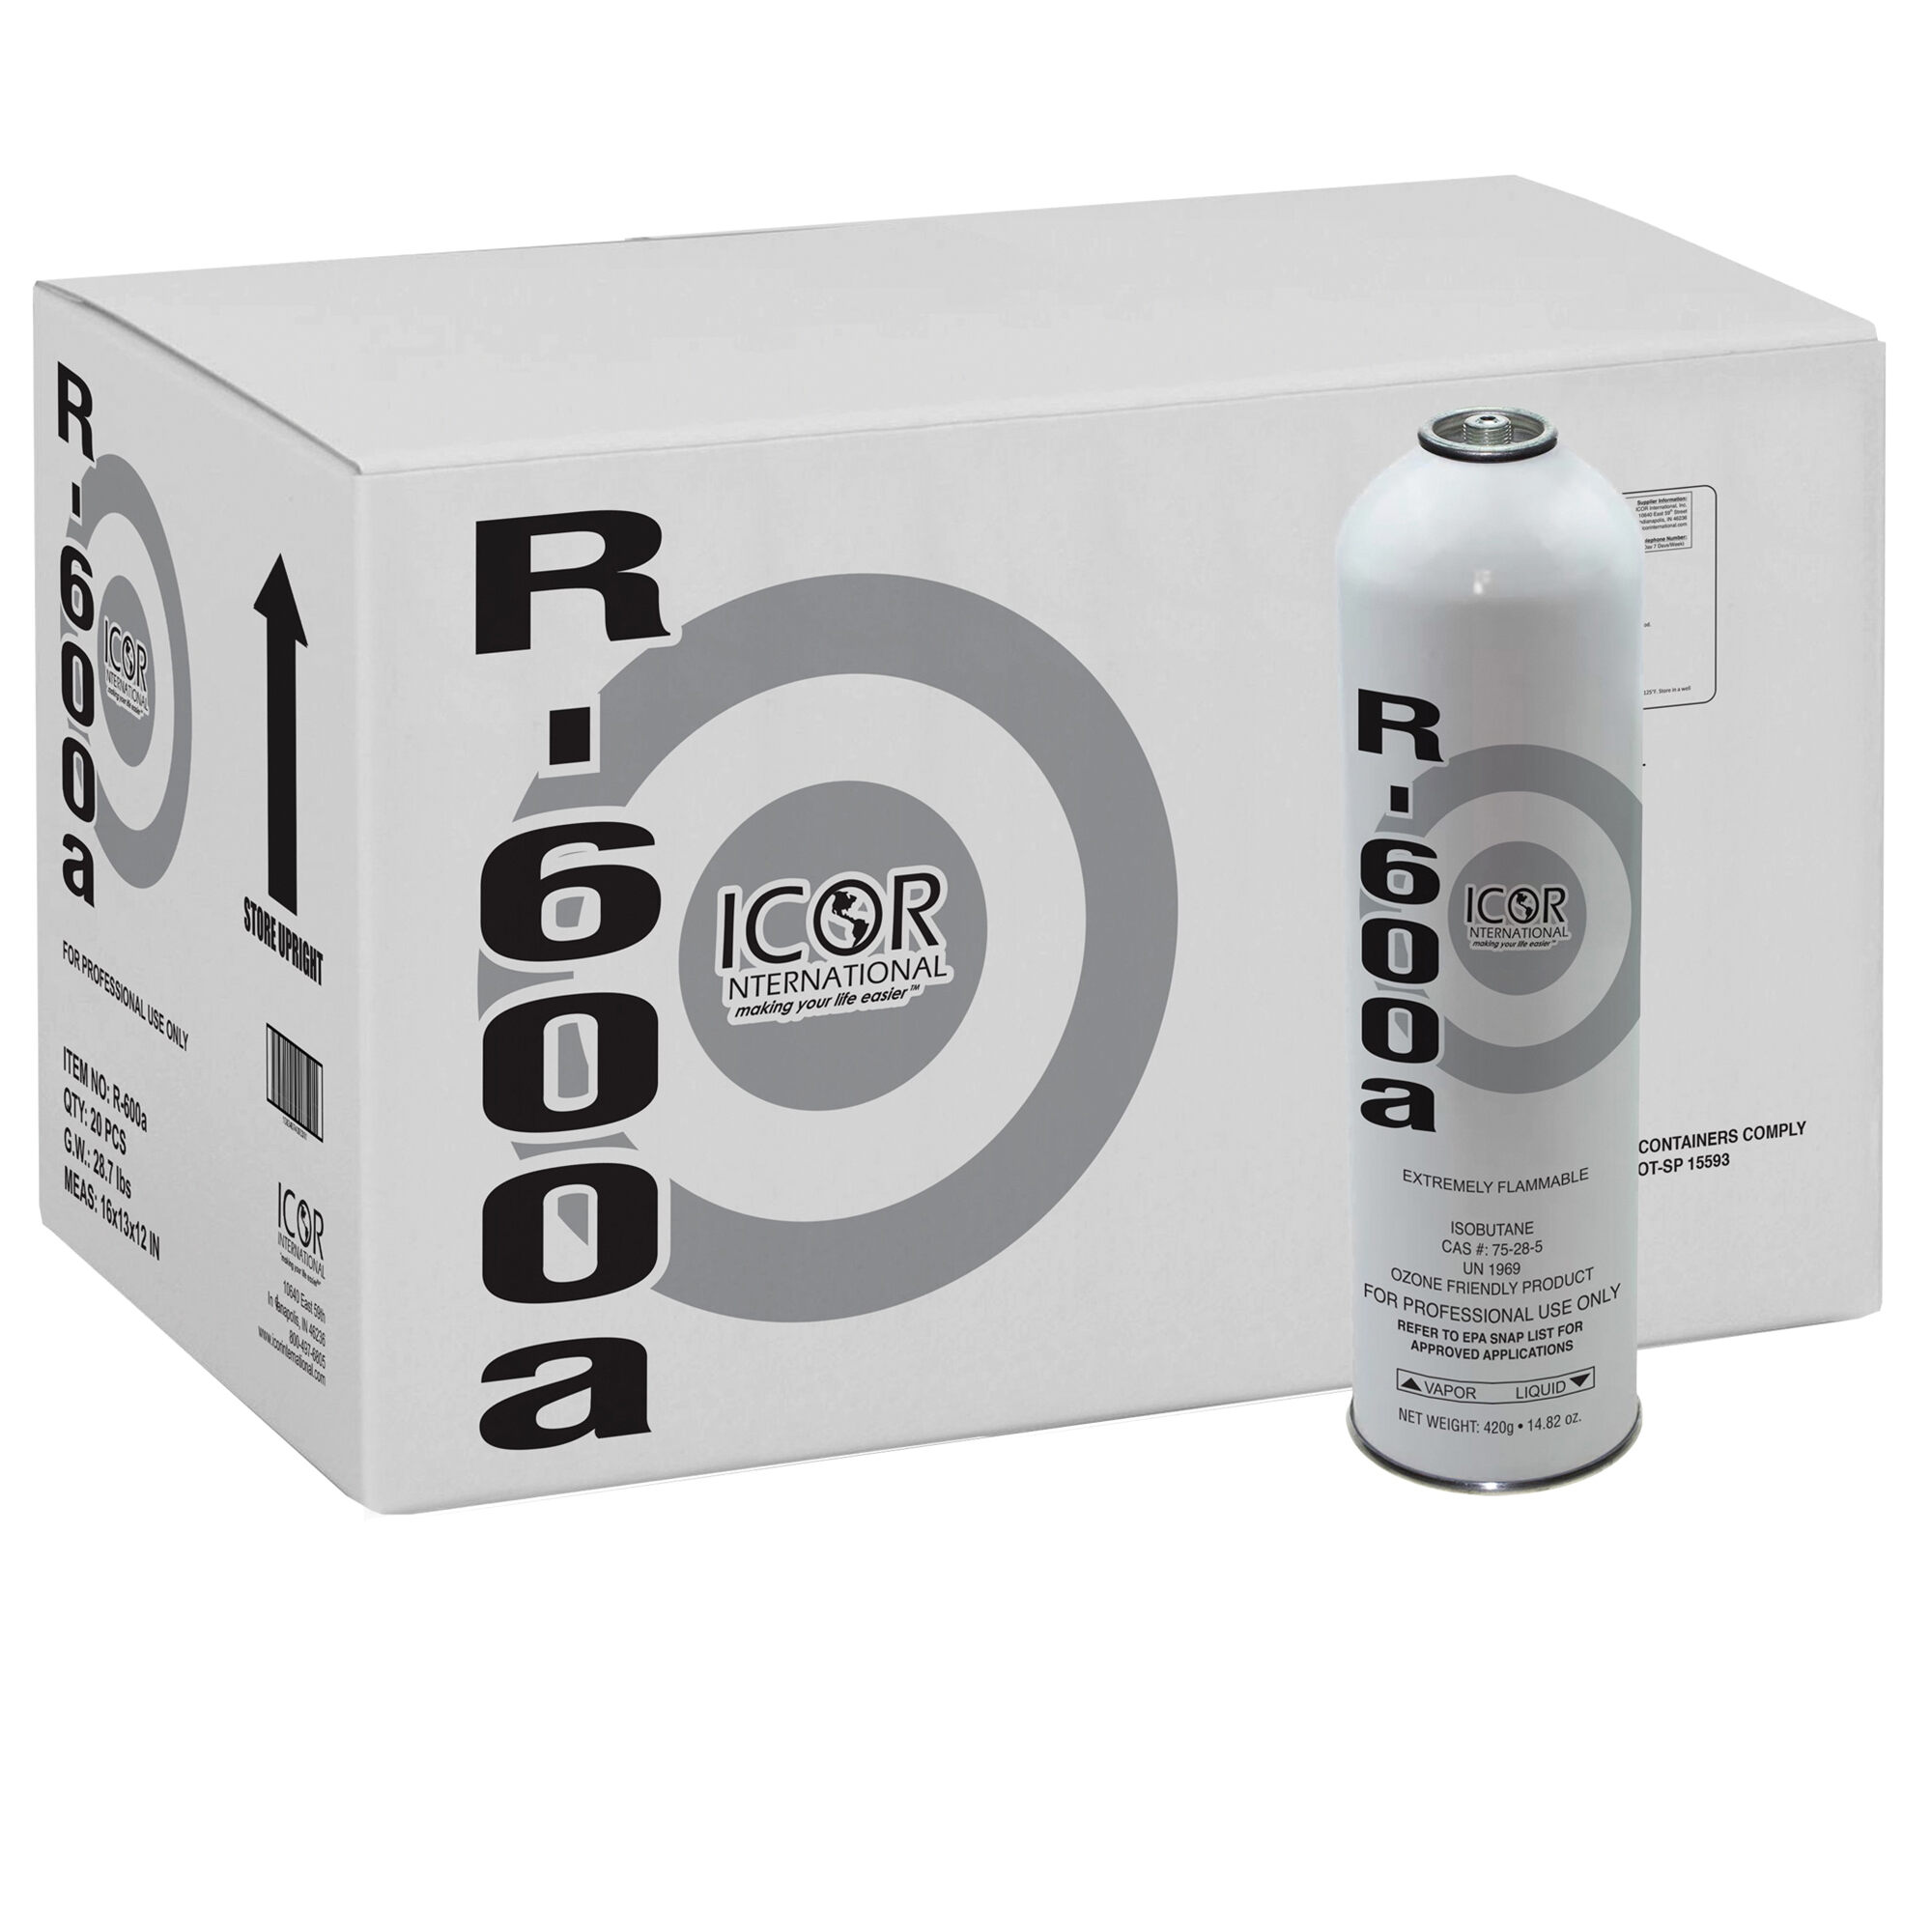 R600A-14 - ICOR International R600A-14 - Other Gases